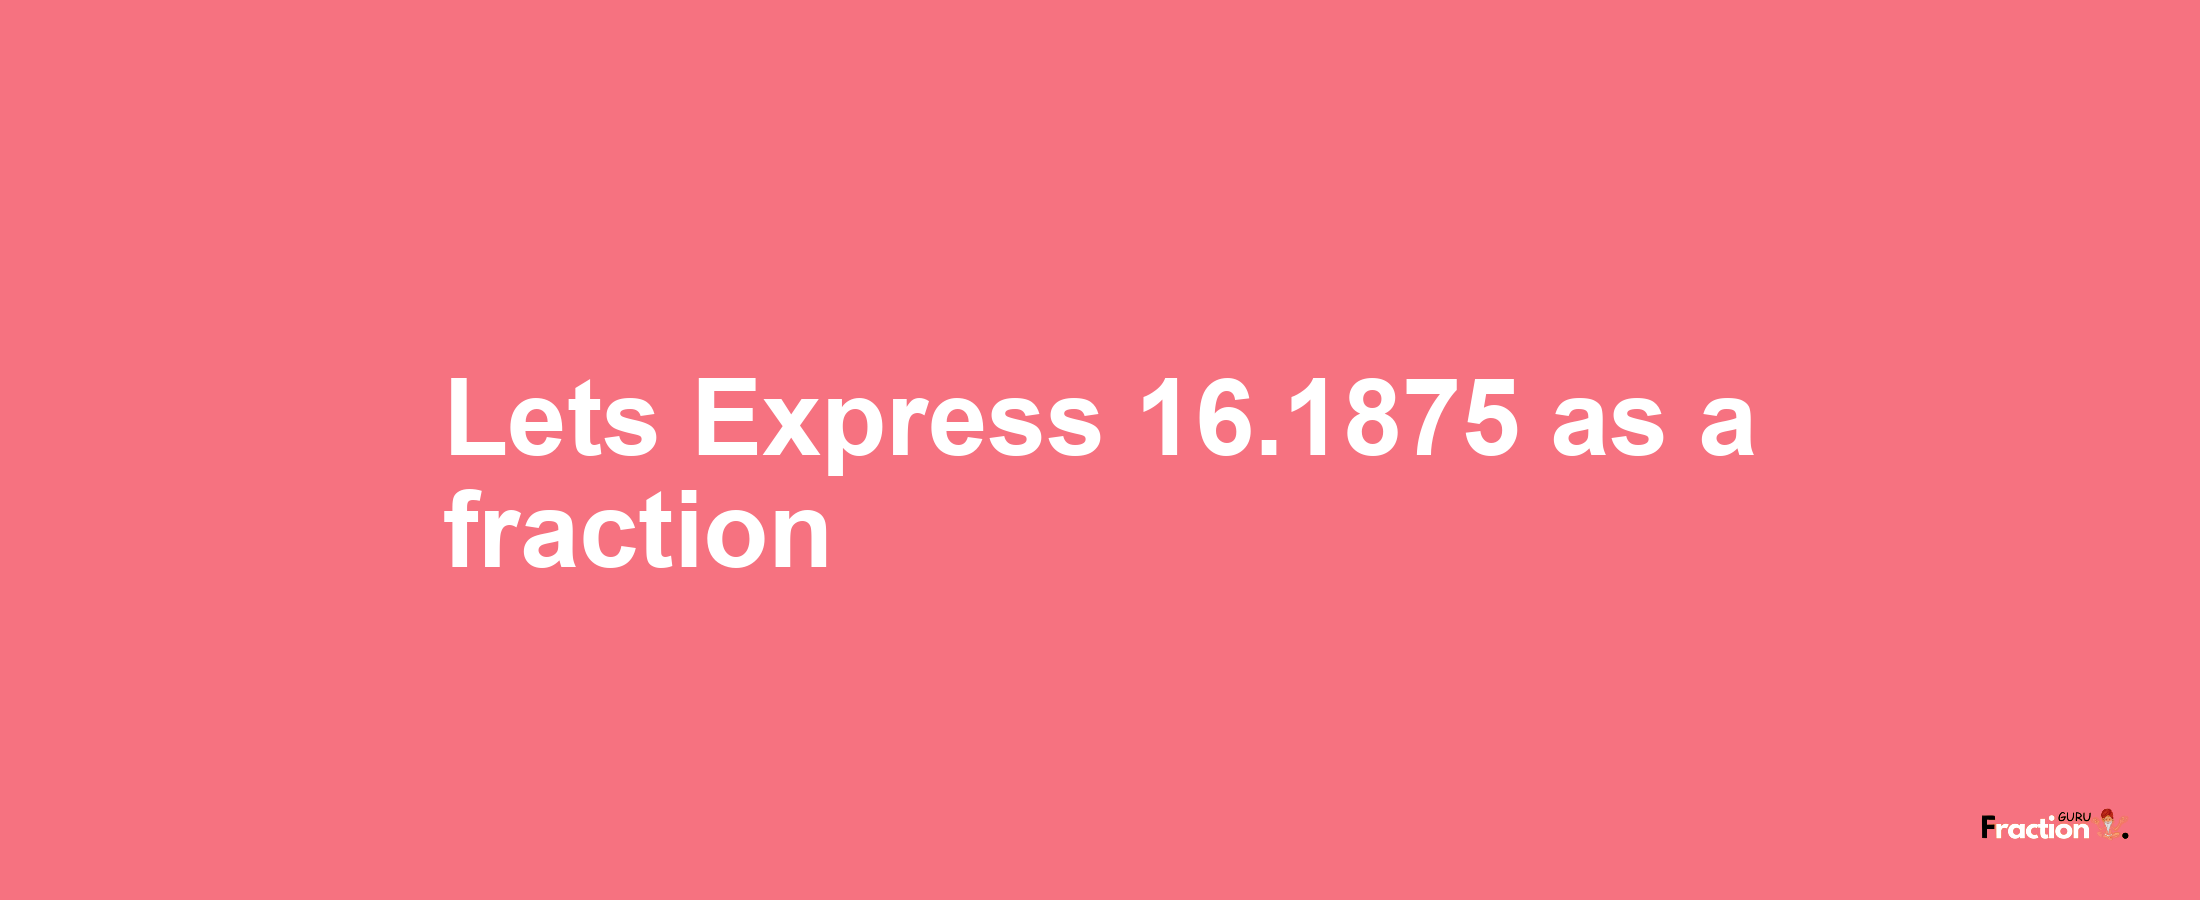 Lets Express 16.1875 as afraction